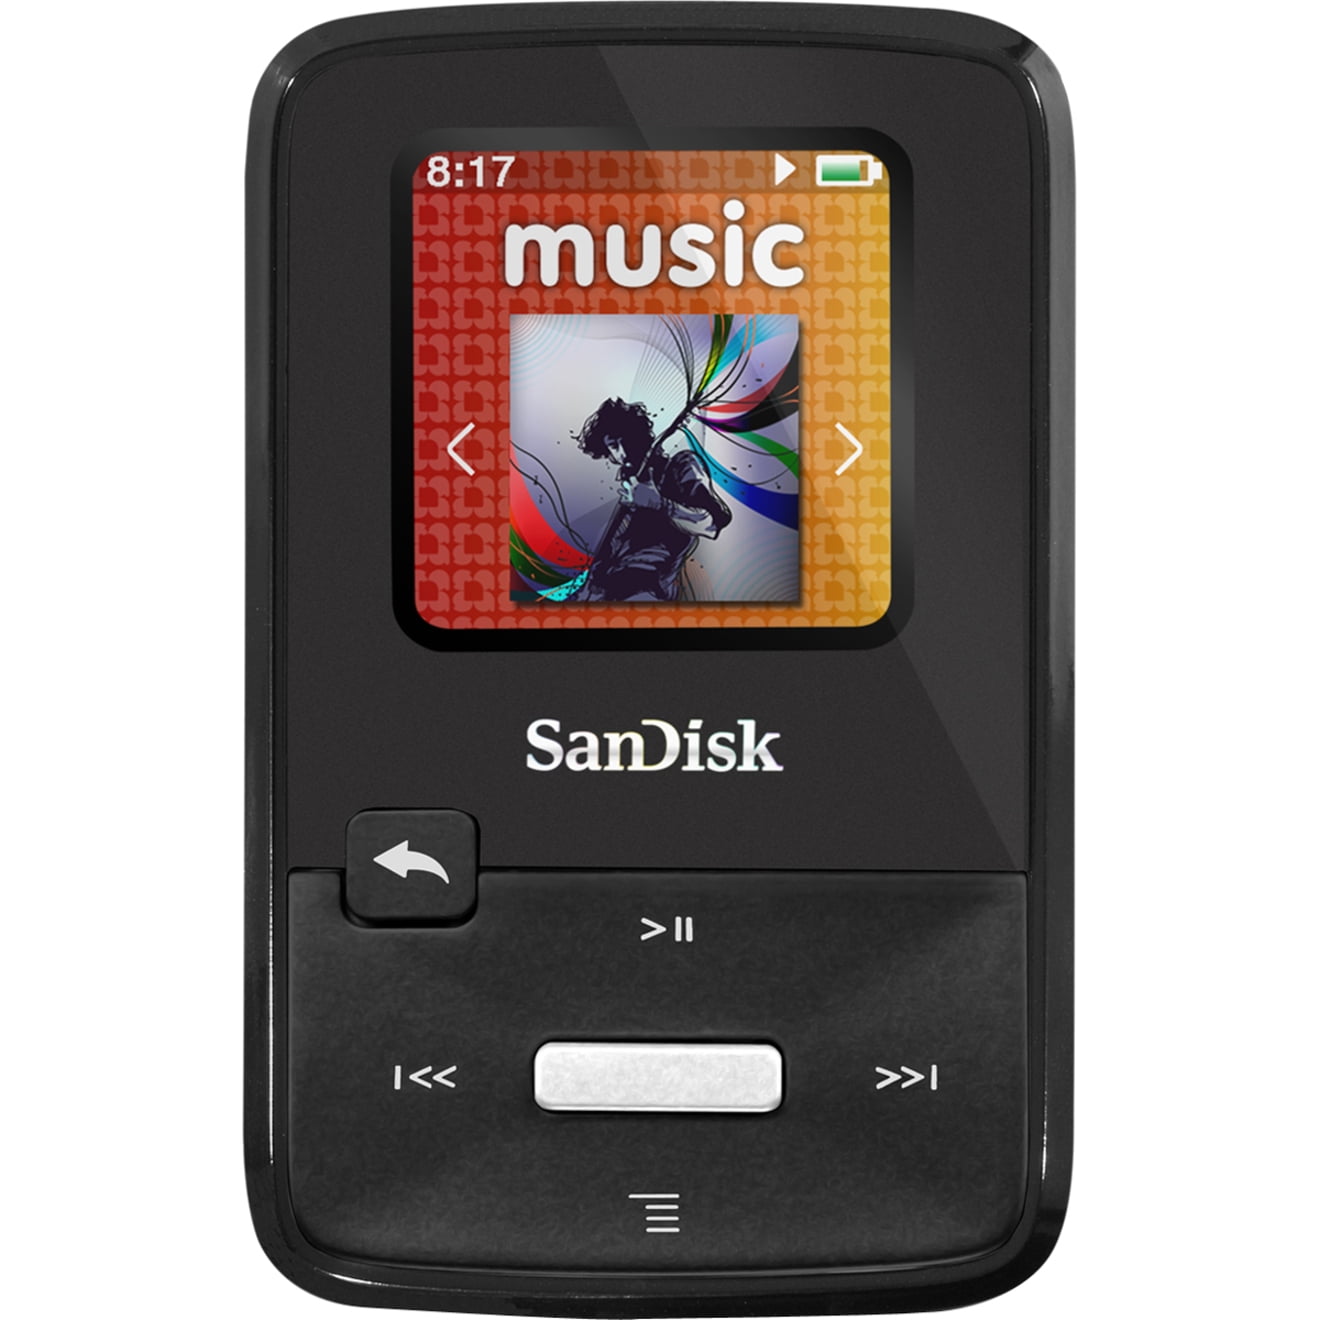 Renewed Black With LCD Screen and MicroSDHC Card Slot SanDisk Clip Sport 4GB MP3 Player 